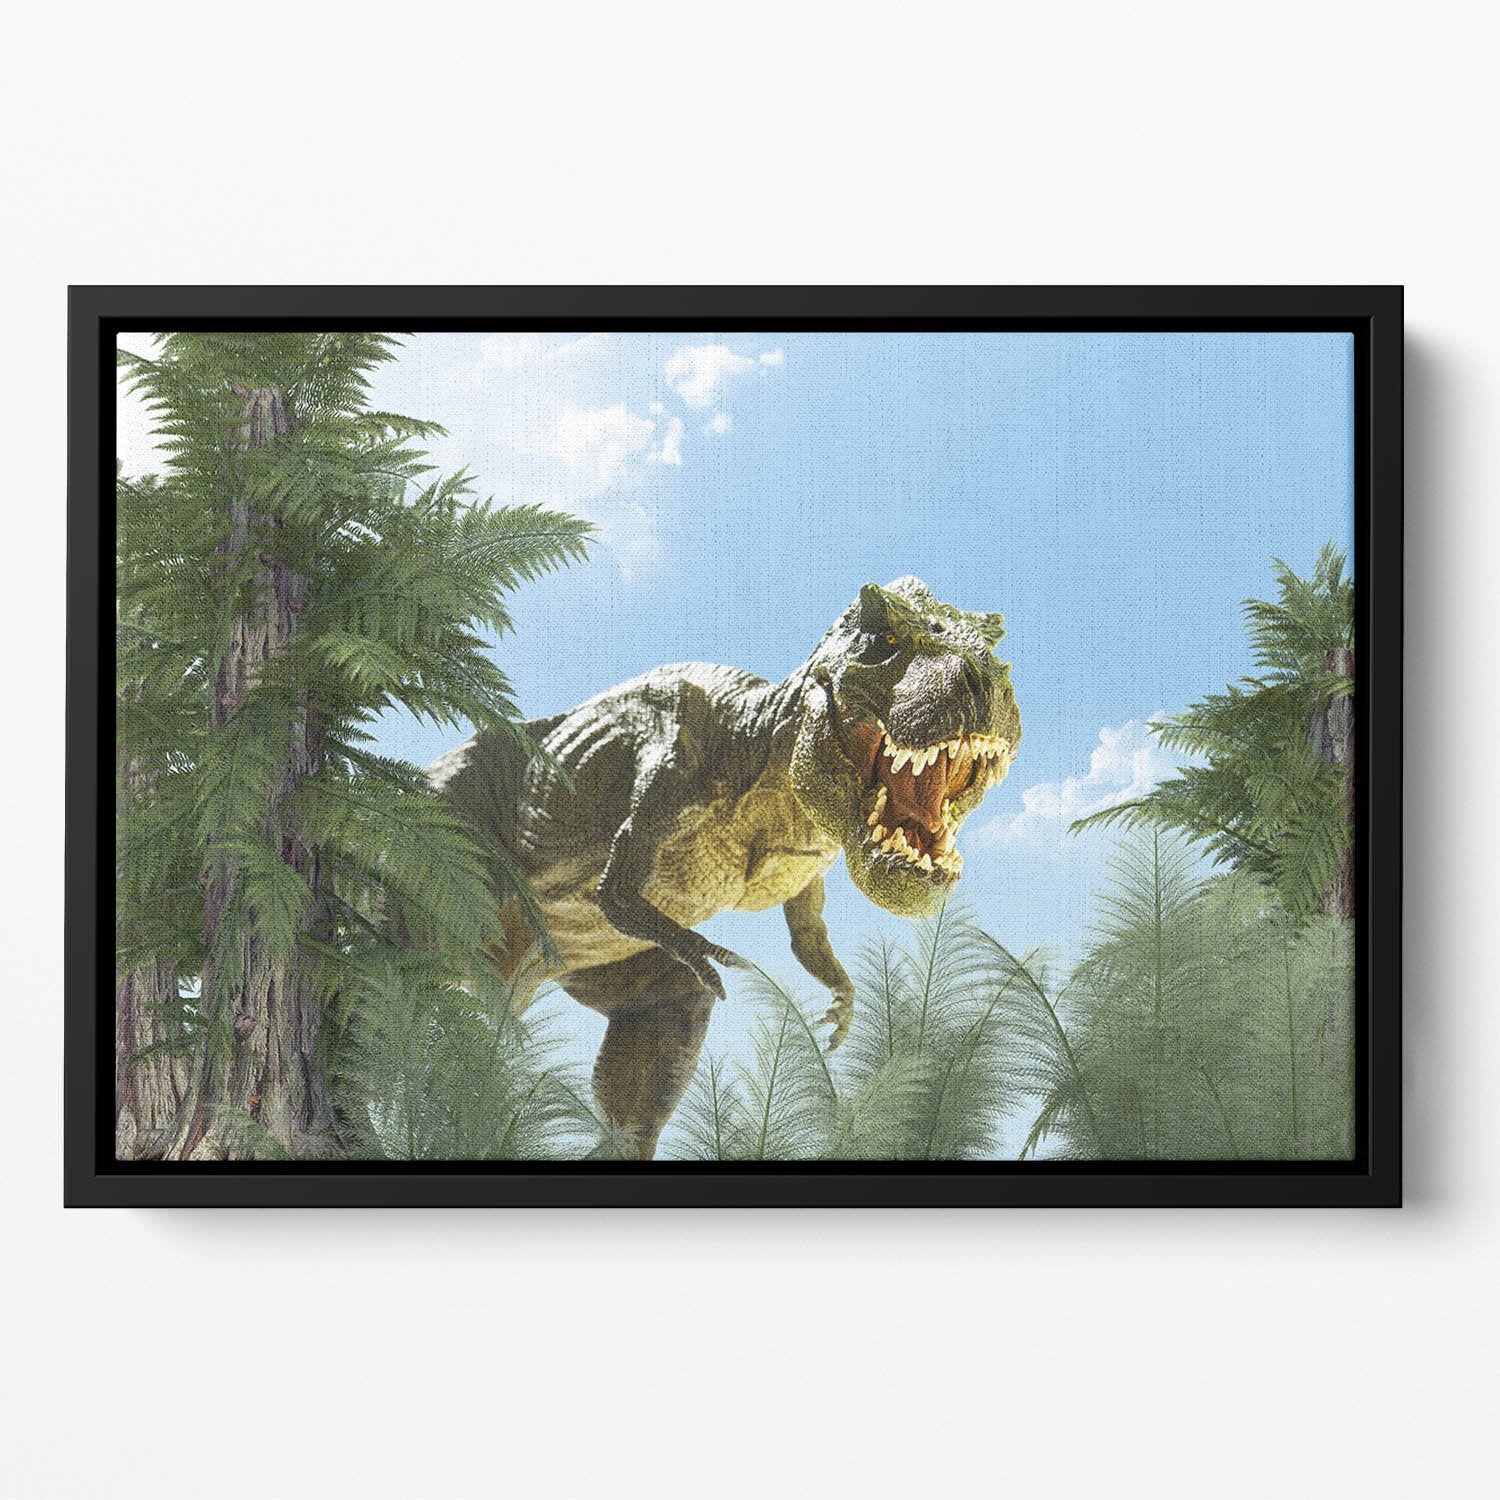 dinosaur in the jungle background Floating Framed Canvas